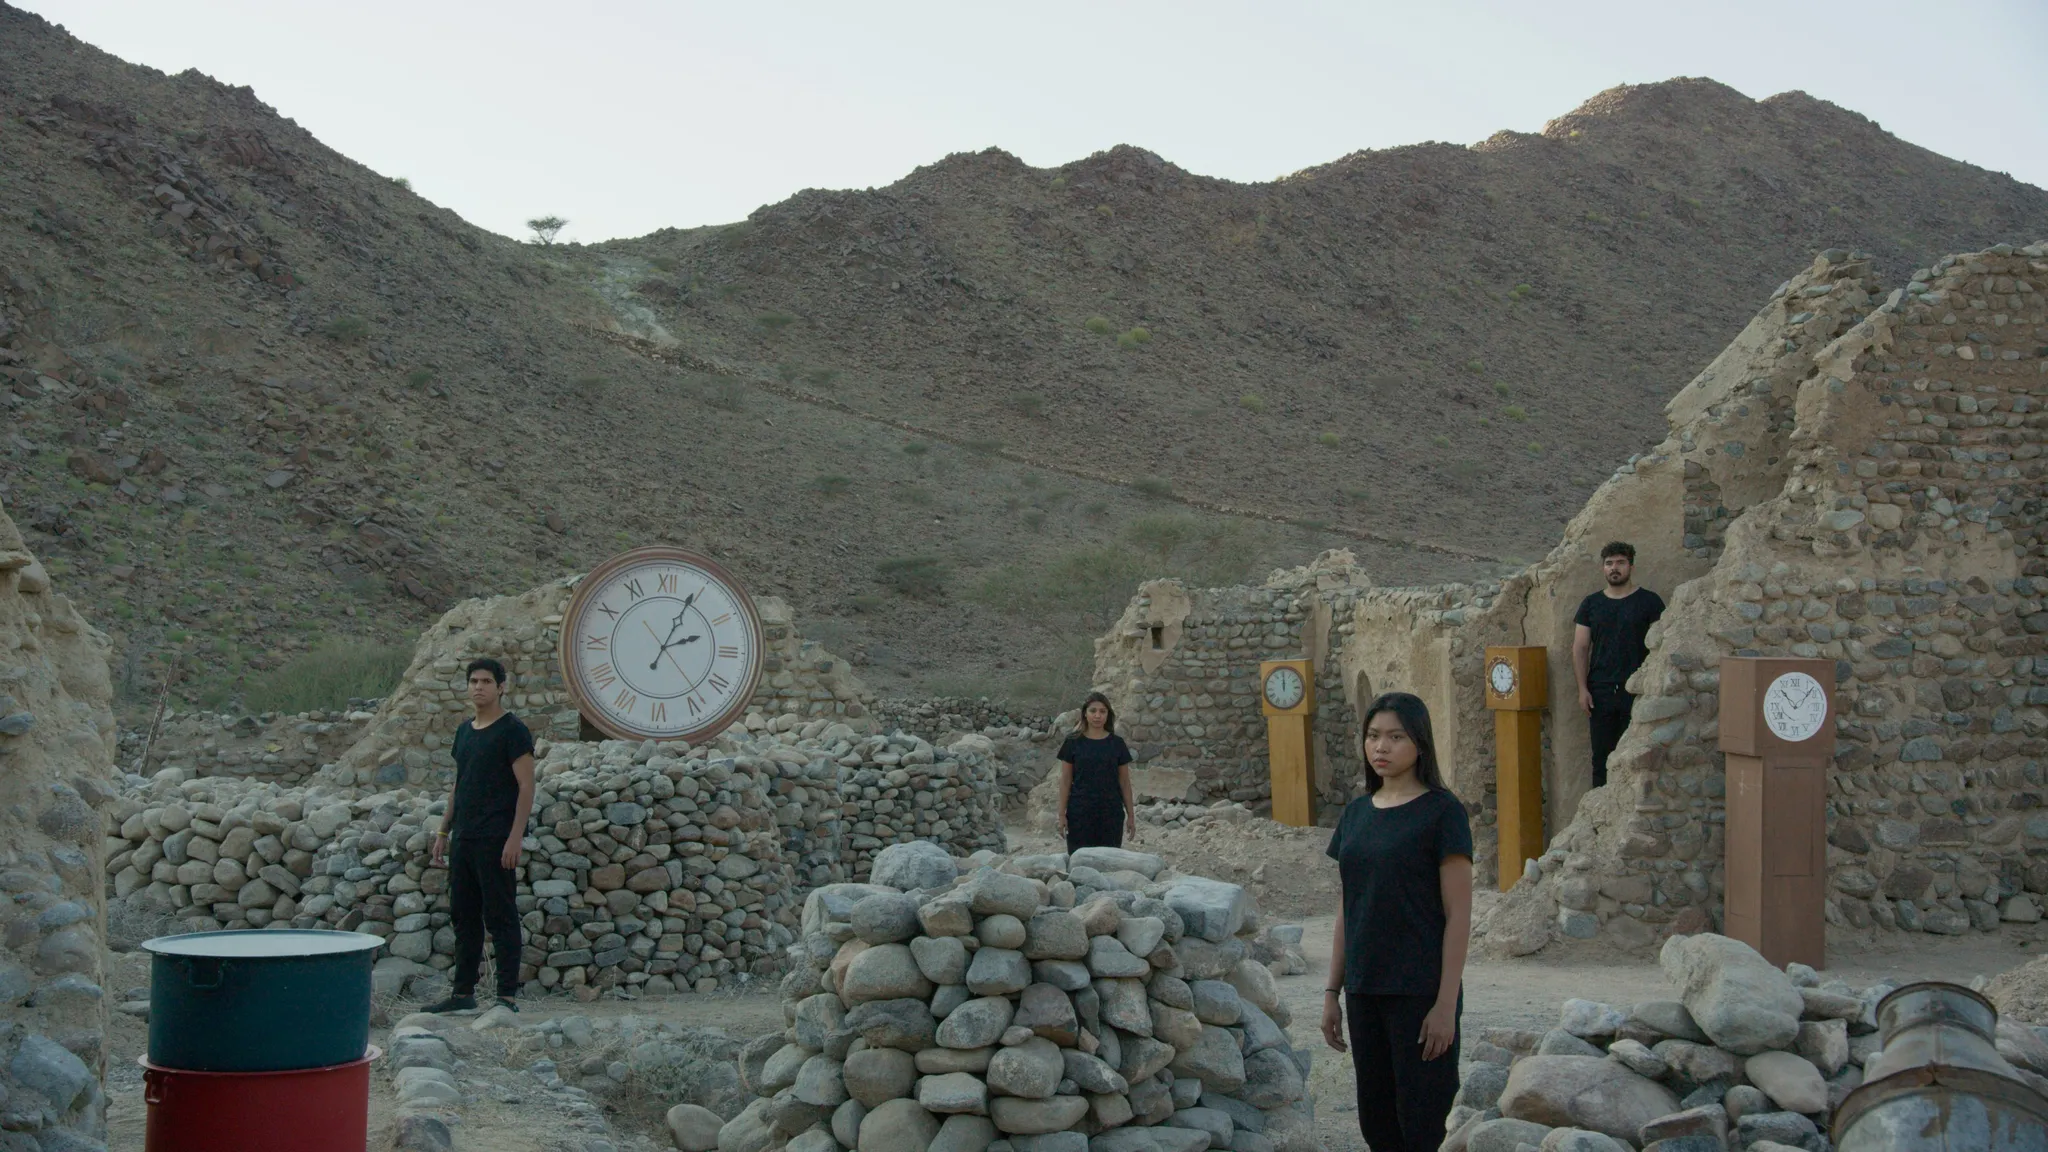 4 persons dressed in black staring at the camera, standing amongst ruins and large clocks, in a deserted rocky landscape